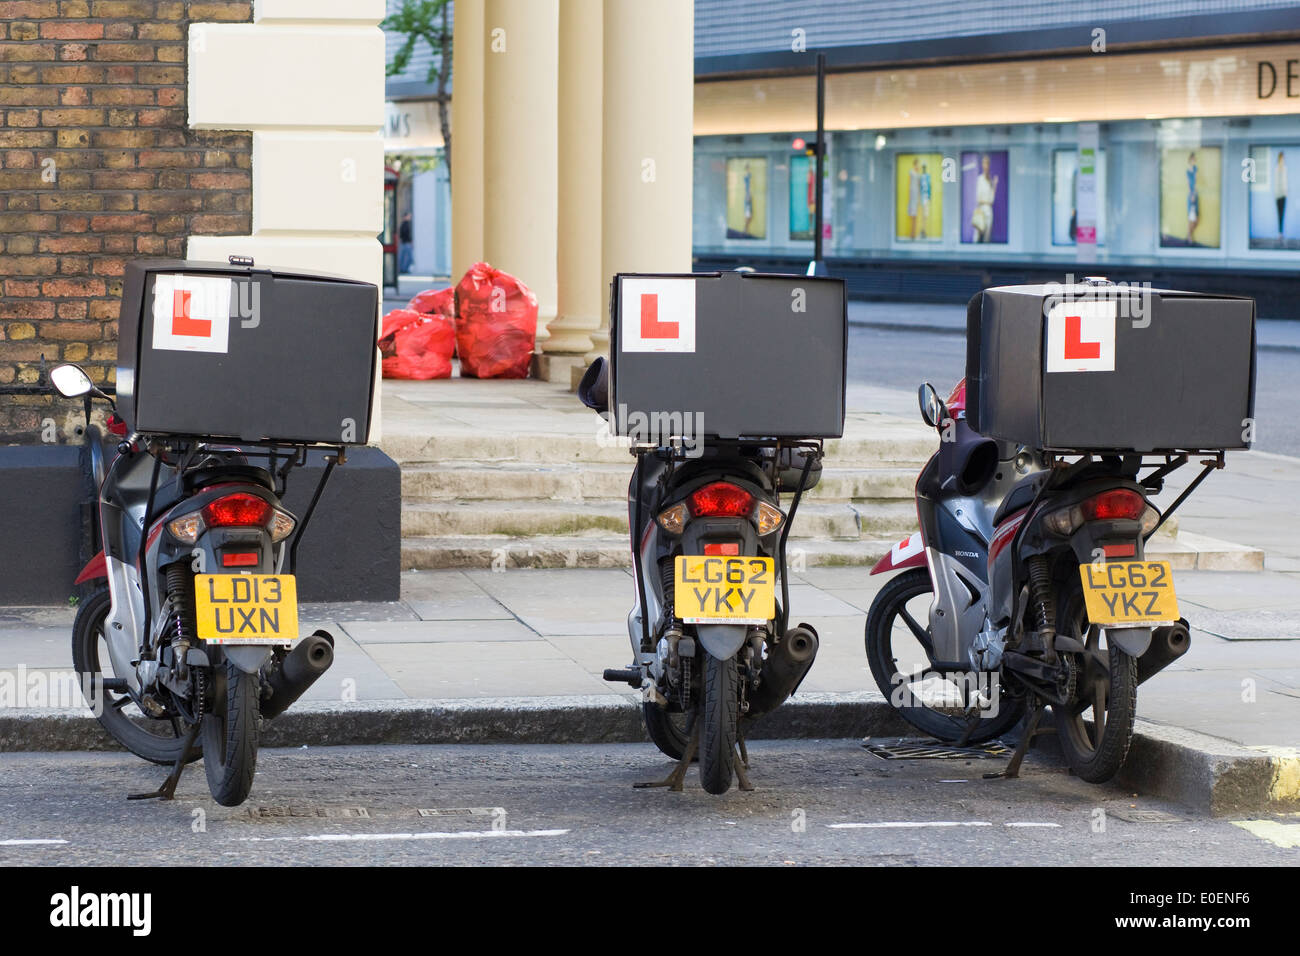 Three Learner Motorcycle parked in a row Stock Photo